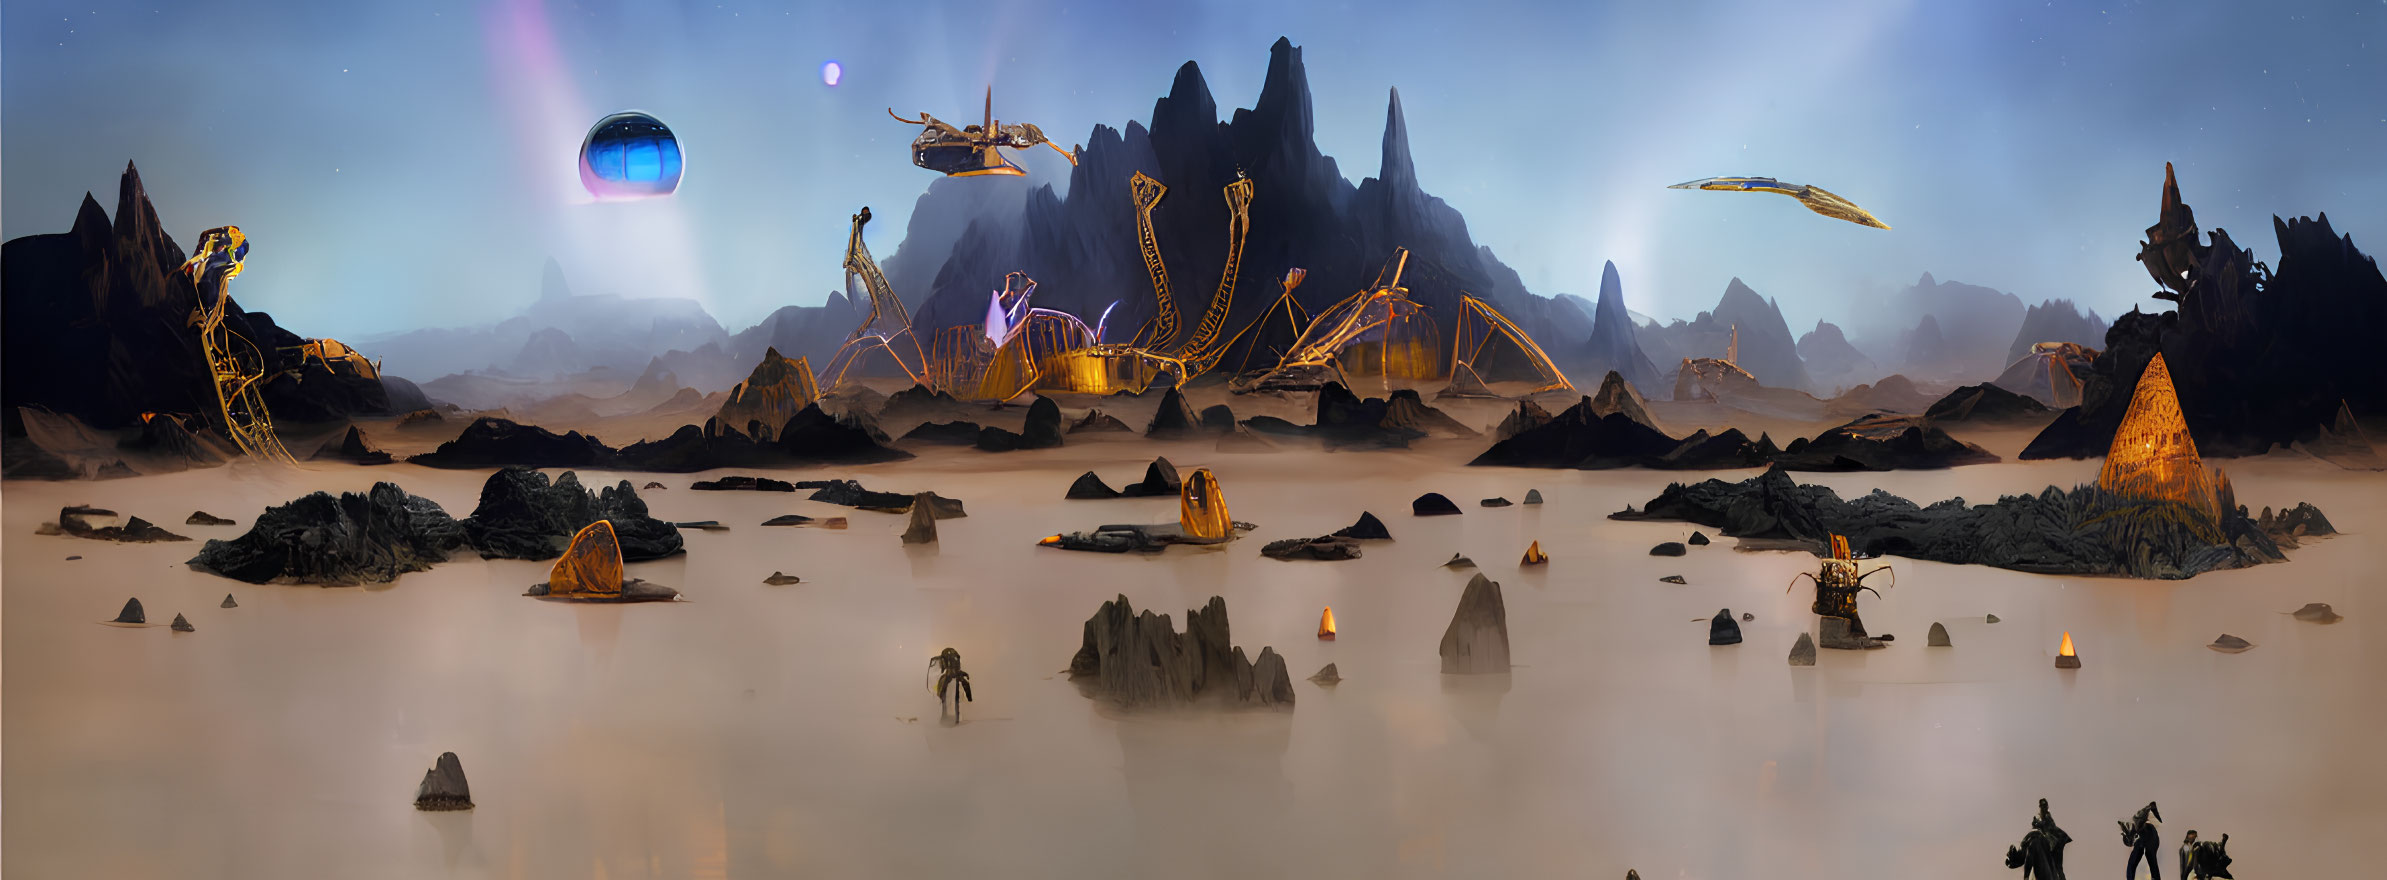 Extraterrestrial landscape with mountains, machinery, beings, and ships